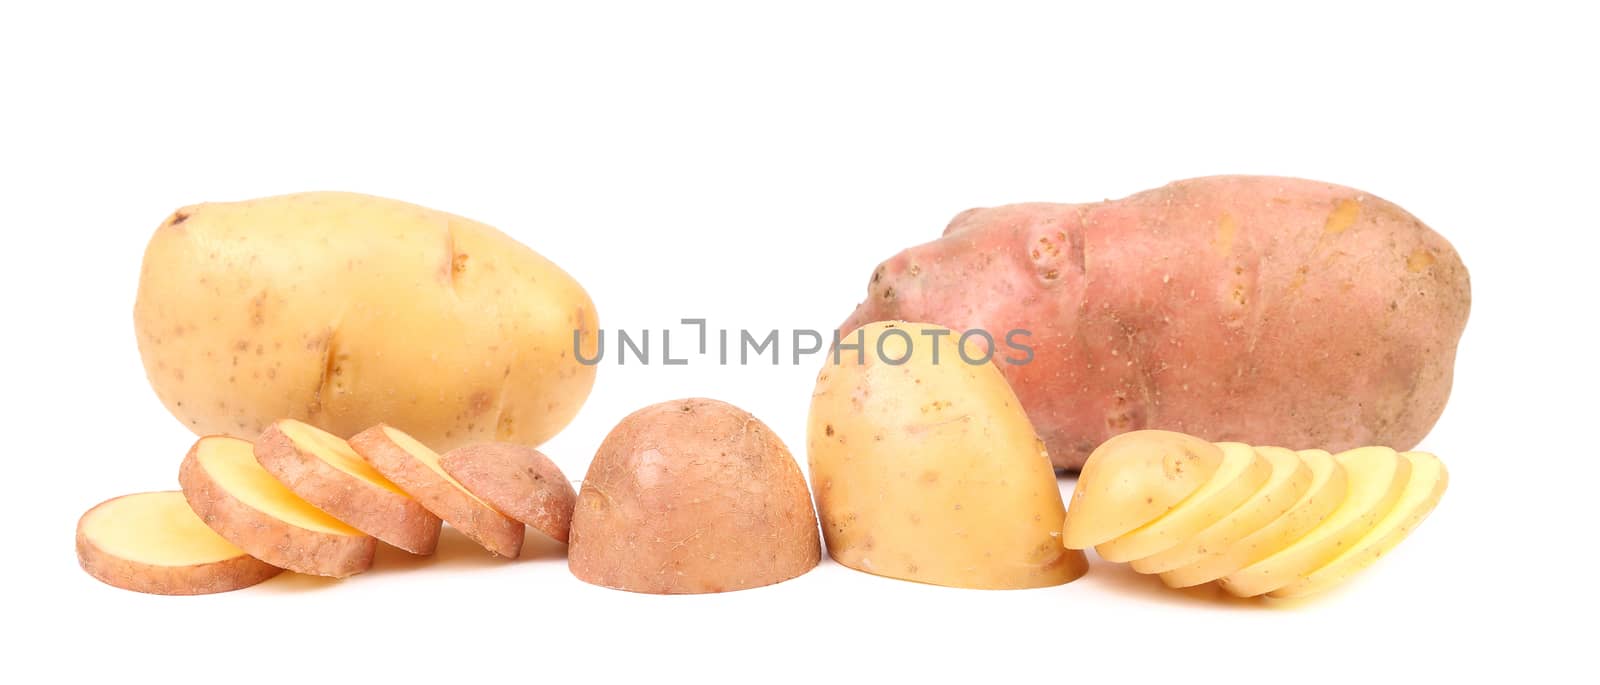 Different potatoes and split tuber. Isolated on a white background.